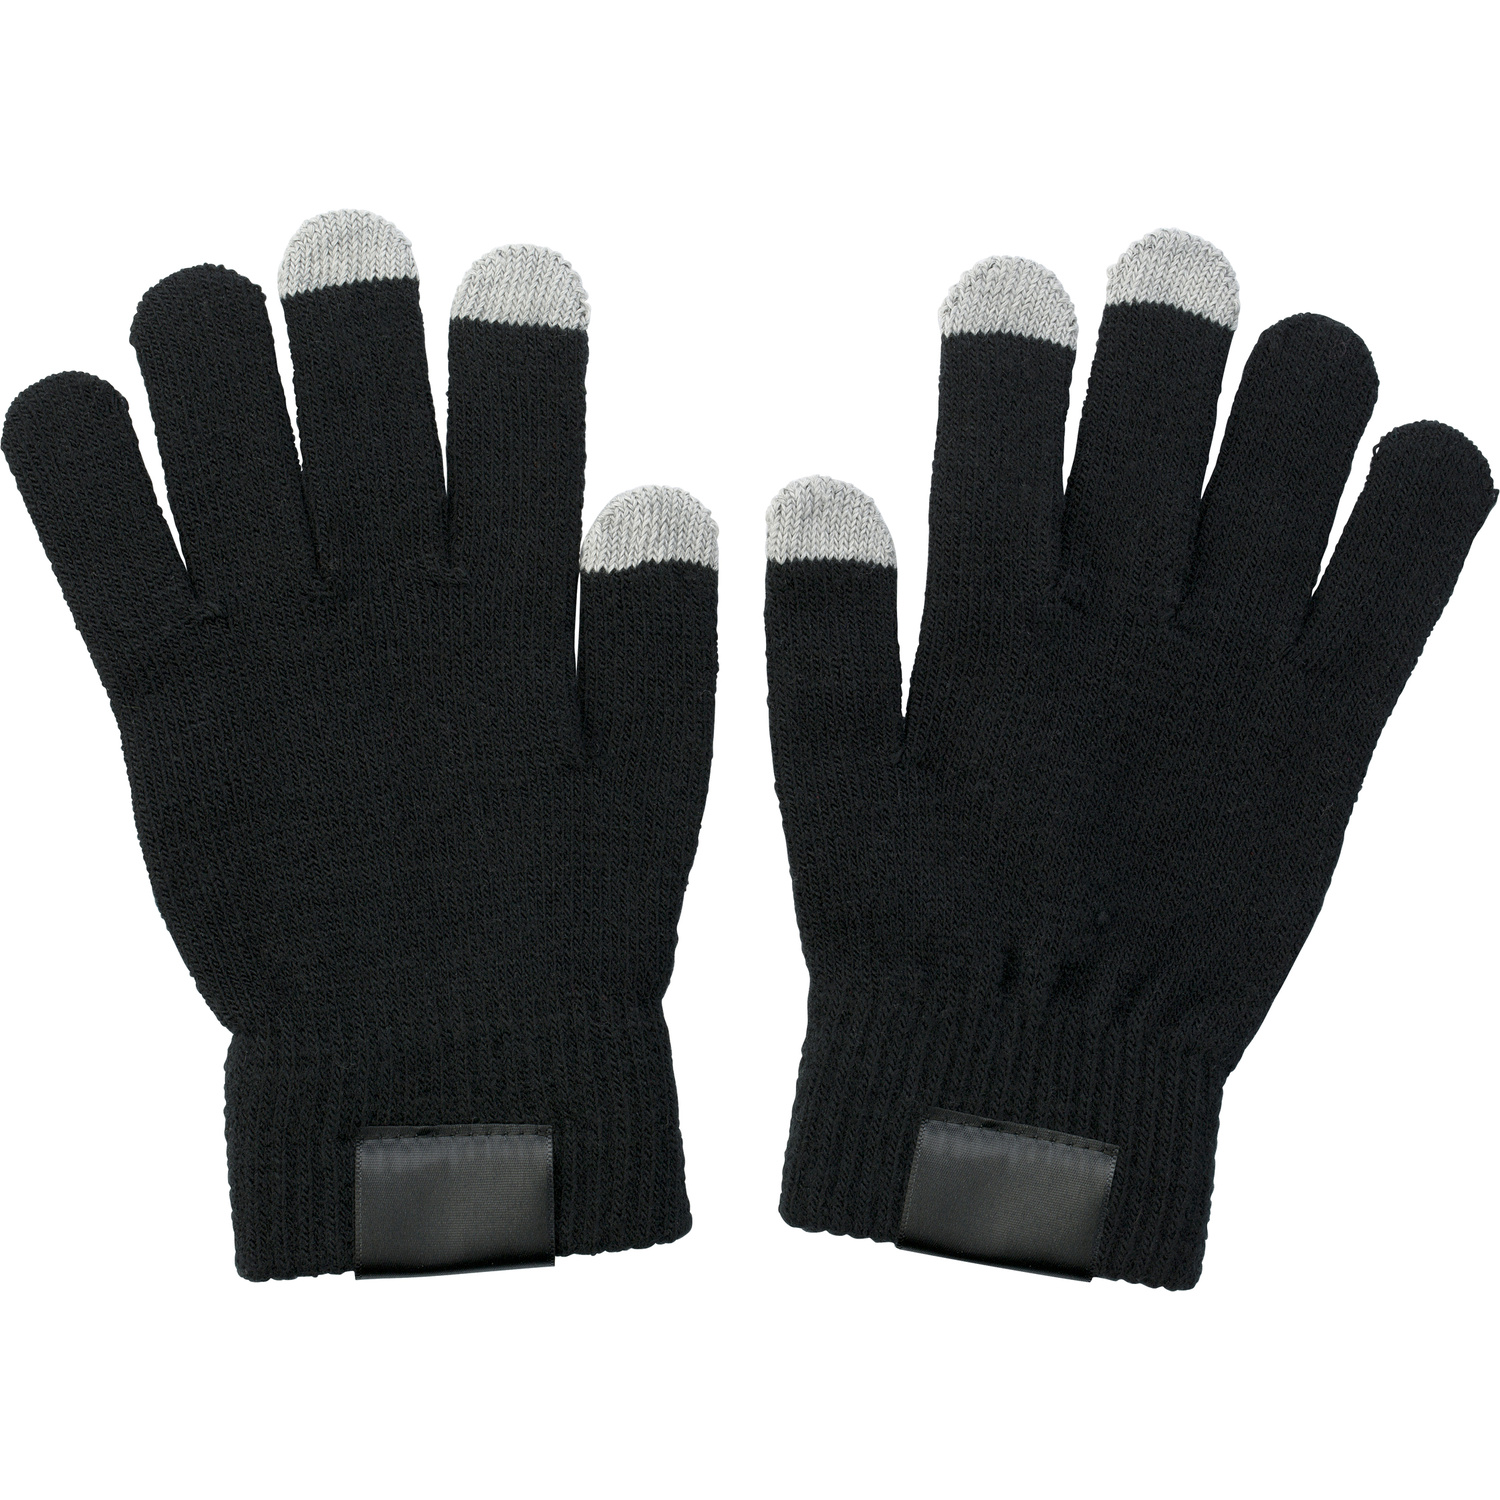 005350 001999999 2d090 bck pro01 fal - Gloves for capacitive screens